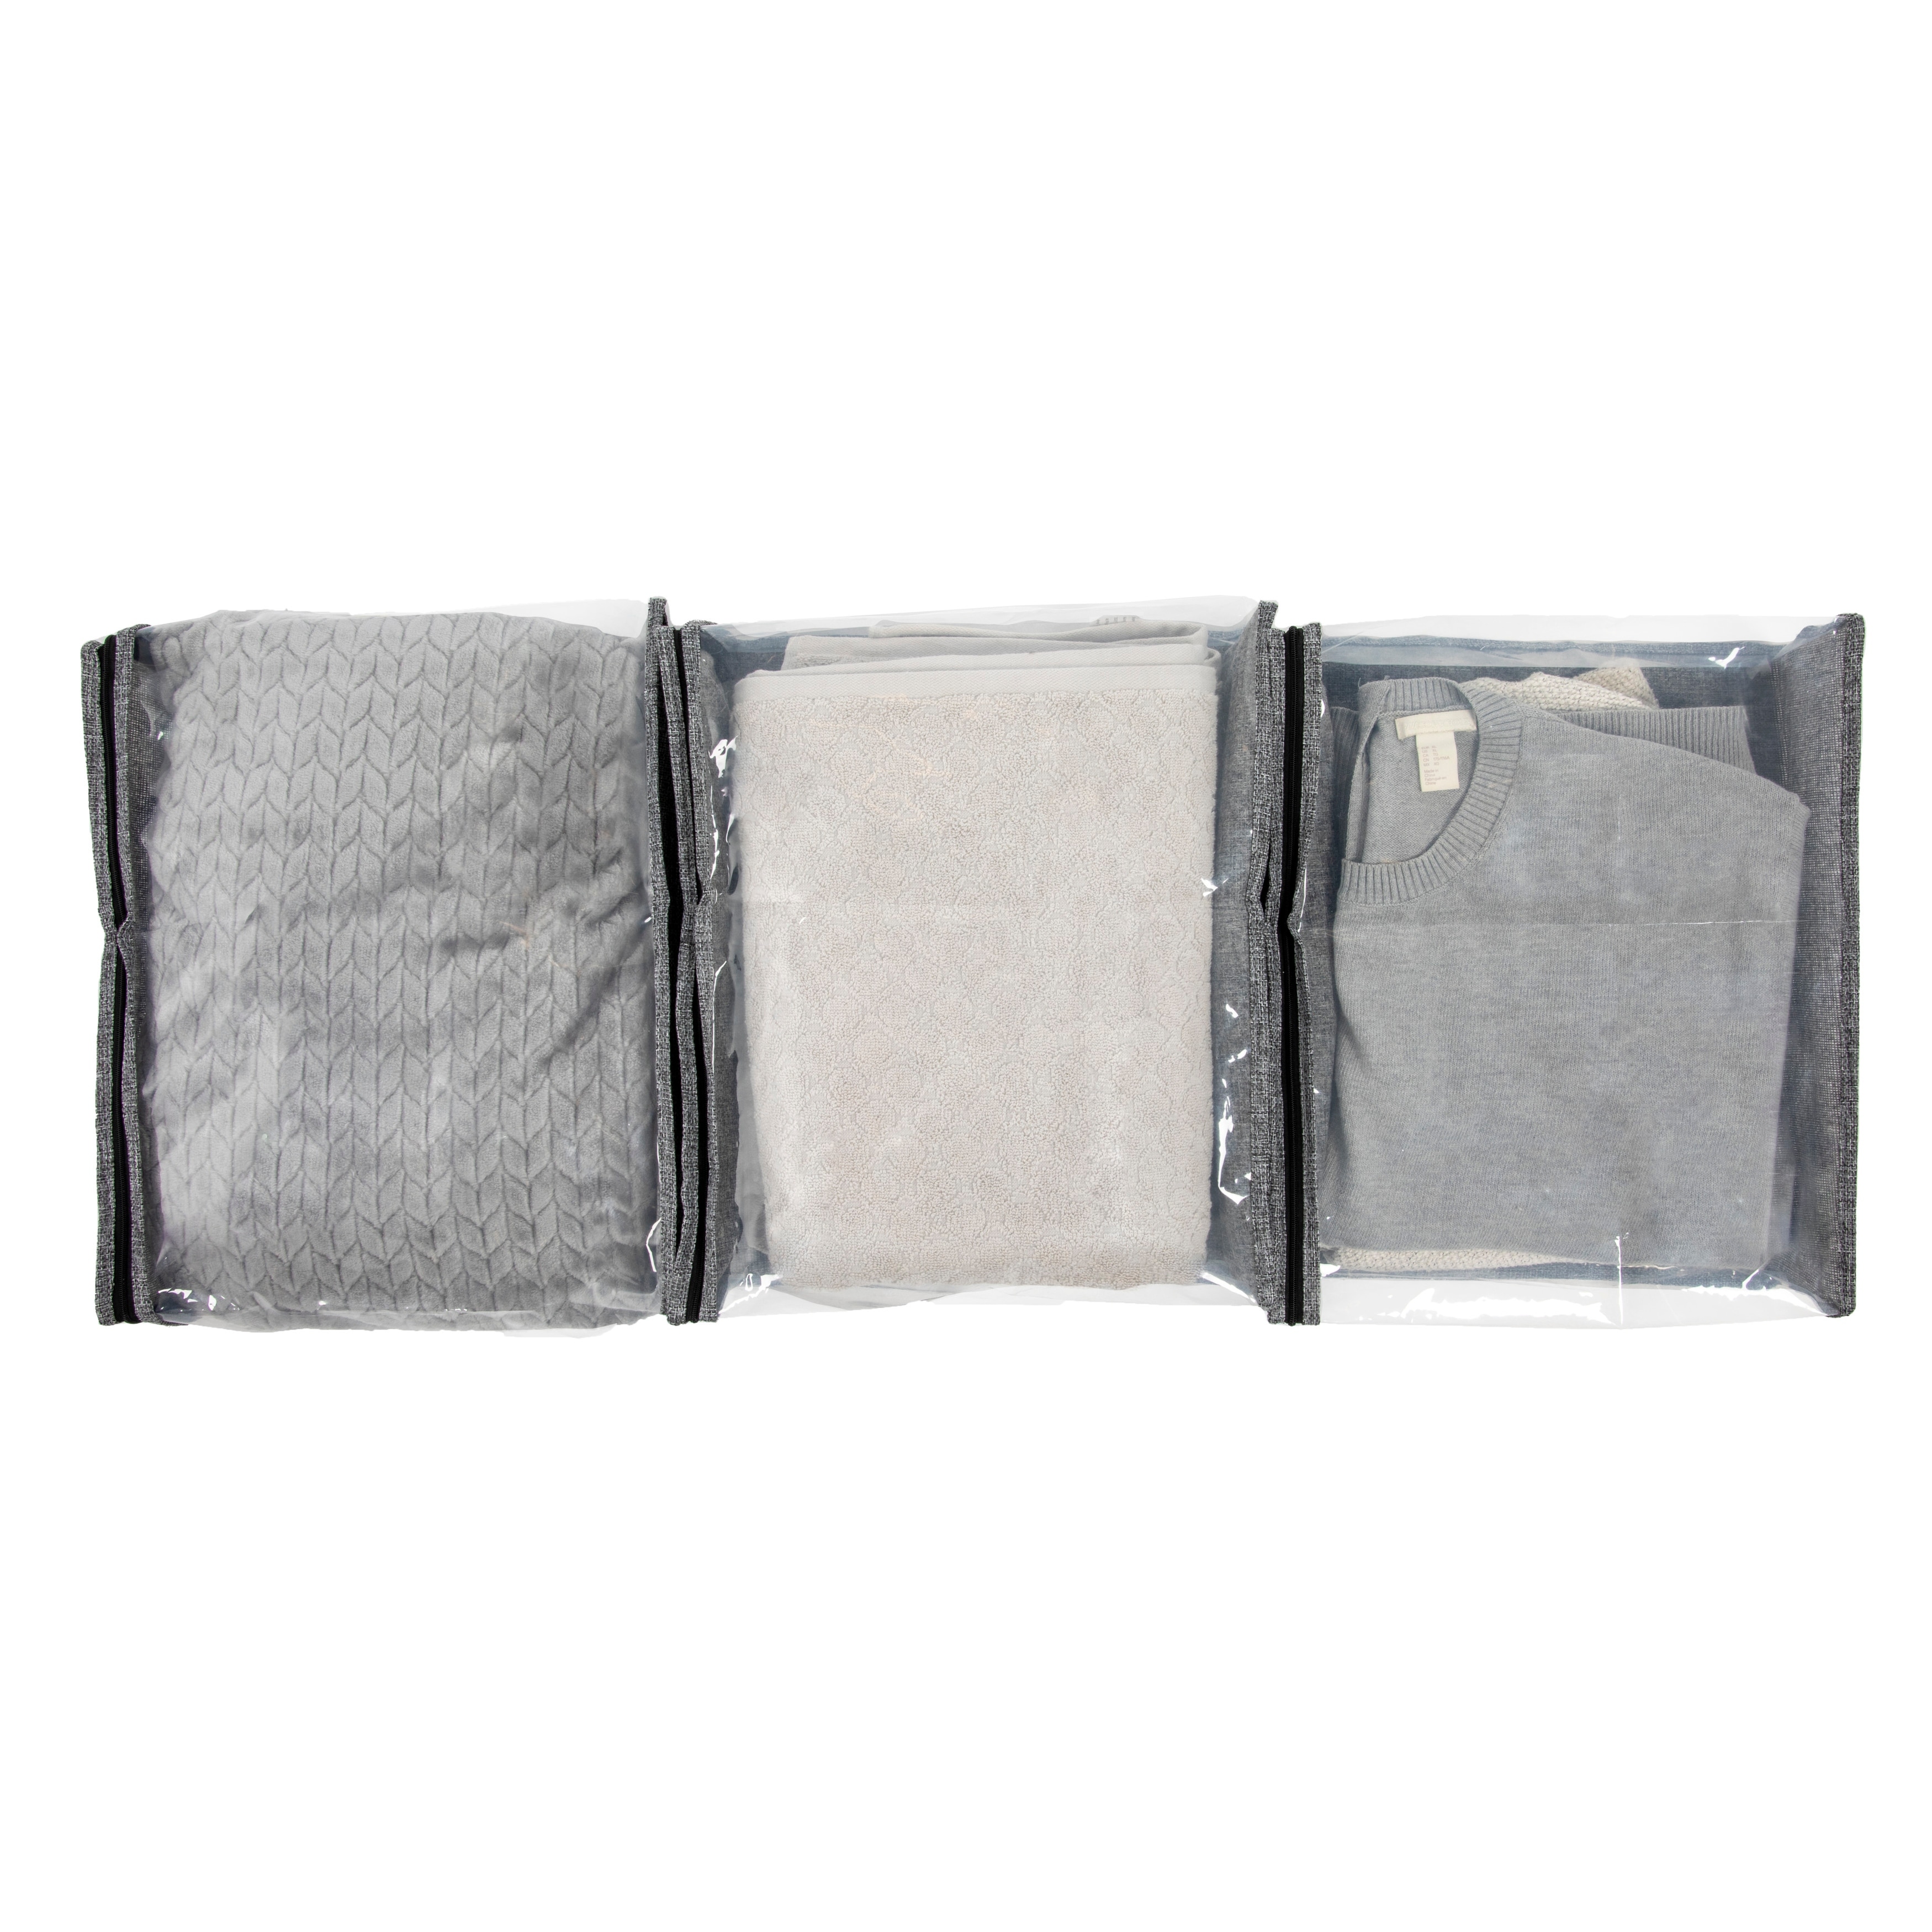 Zippered Sweater Storage Bags with Clear Vision Panel - 16.0L x